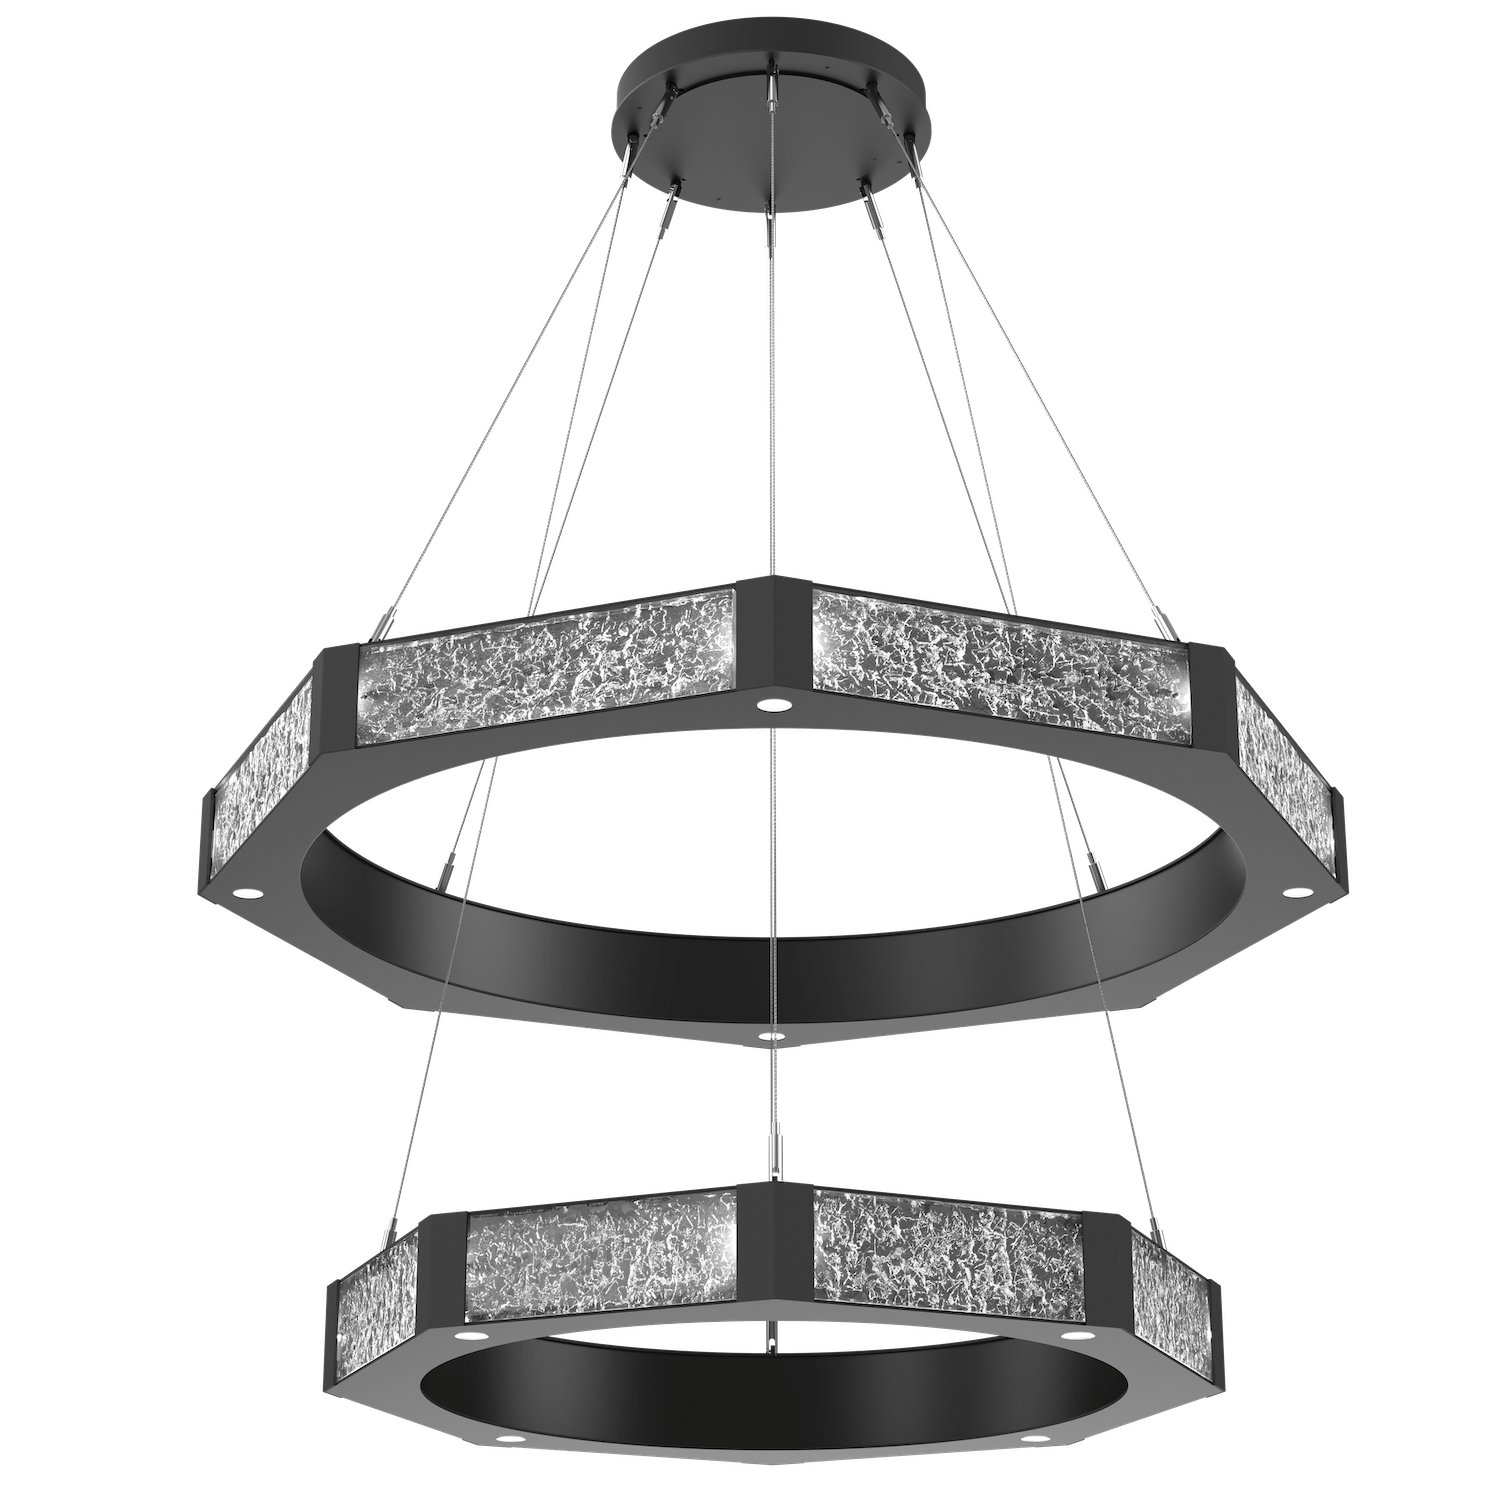 CHB0061-2B-MB-GC-Hammerton-Studio-Glacier-48-inch-two-tier-ring-chandelier-with-matte-black-finish-and-clear-blown-glass-with-geo-clear-cast-glass-diffusers-and-LED-lamping